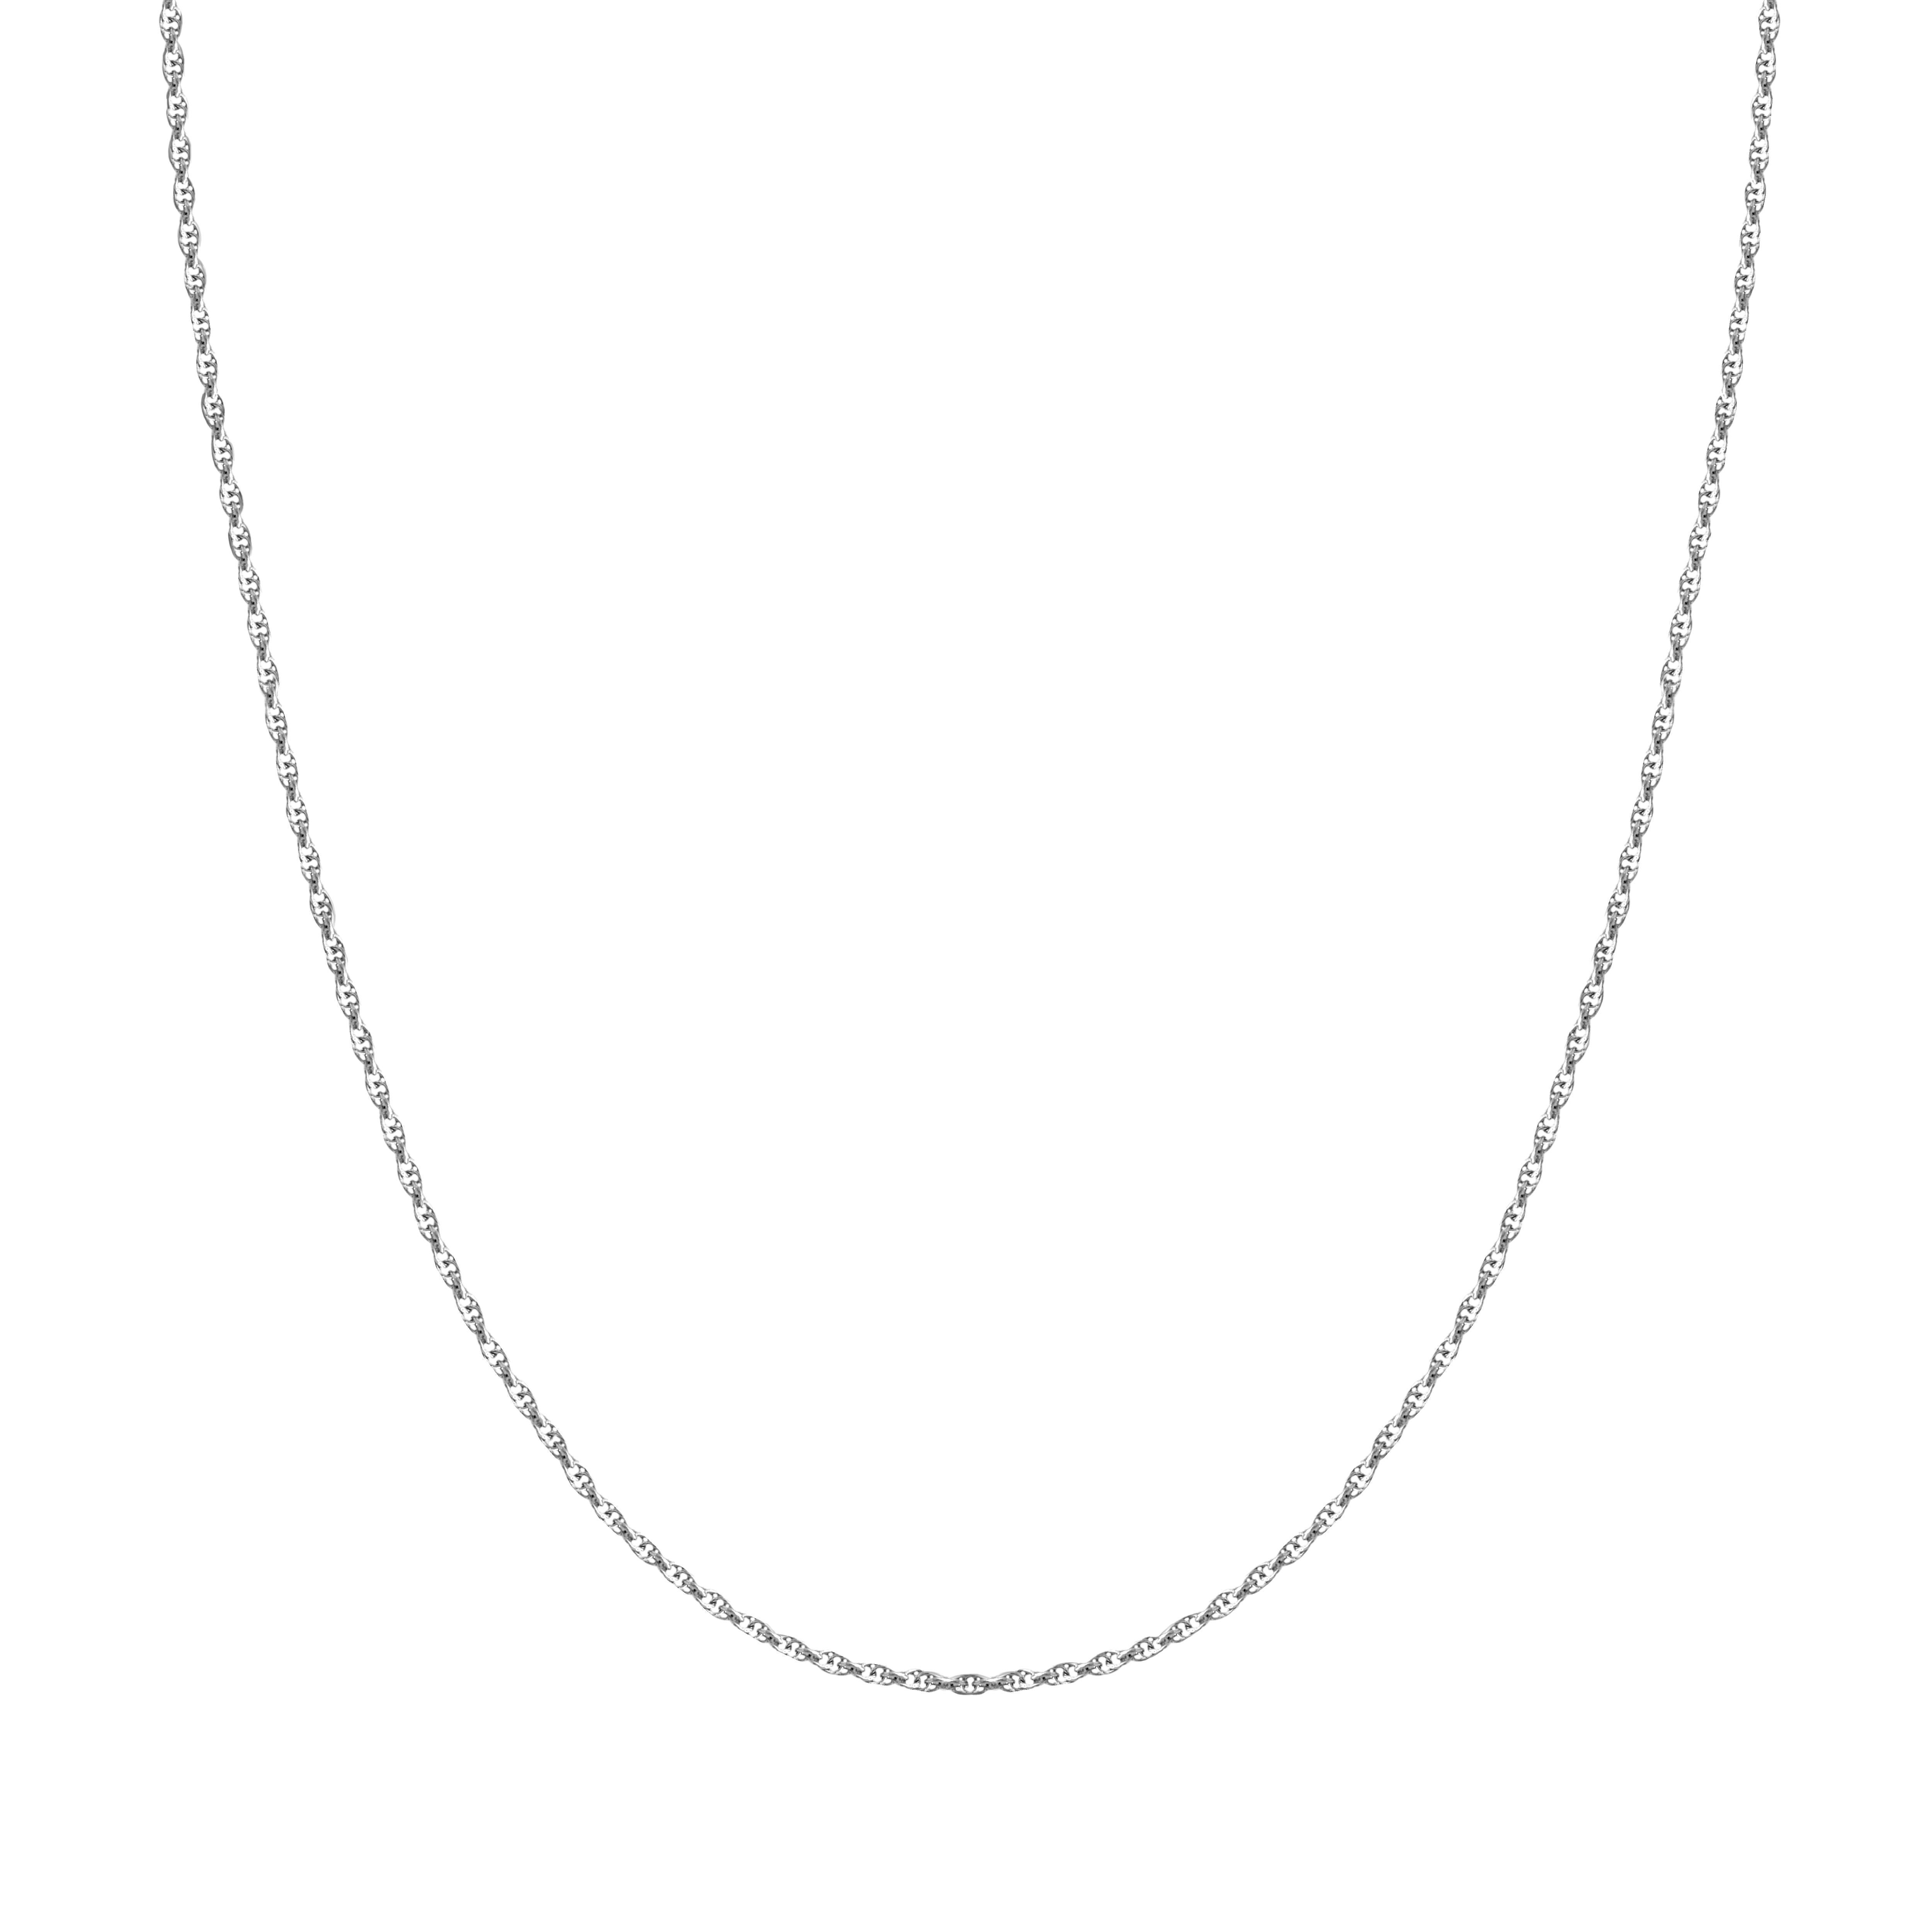 Classic Women's Real Solid 14K White Gold Rope Chain. This genuine gold rope chain is 18 inches in length, approx. 0.50 grams in weight and 0.6mm wide.

This gold rope chain is genuine and comes stamped solid 14K gold.

We only offer real gold